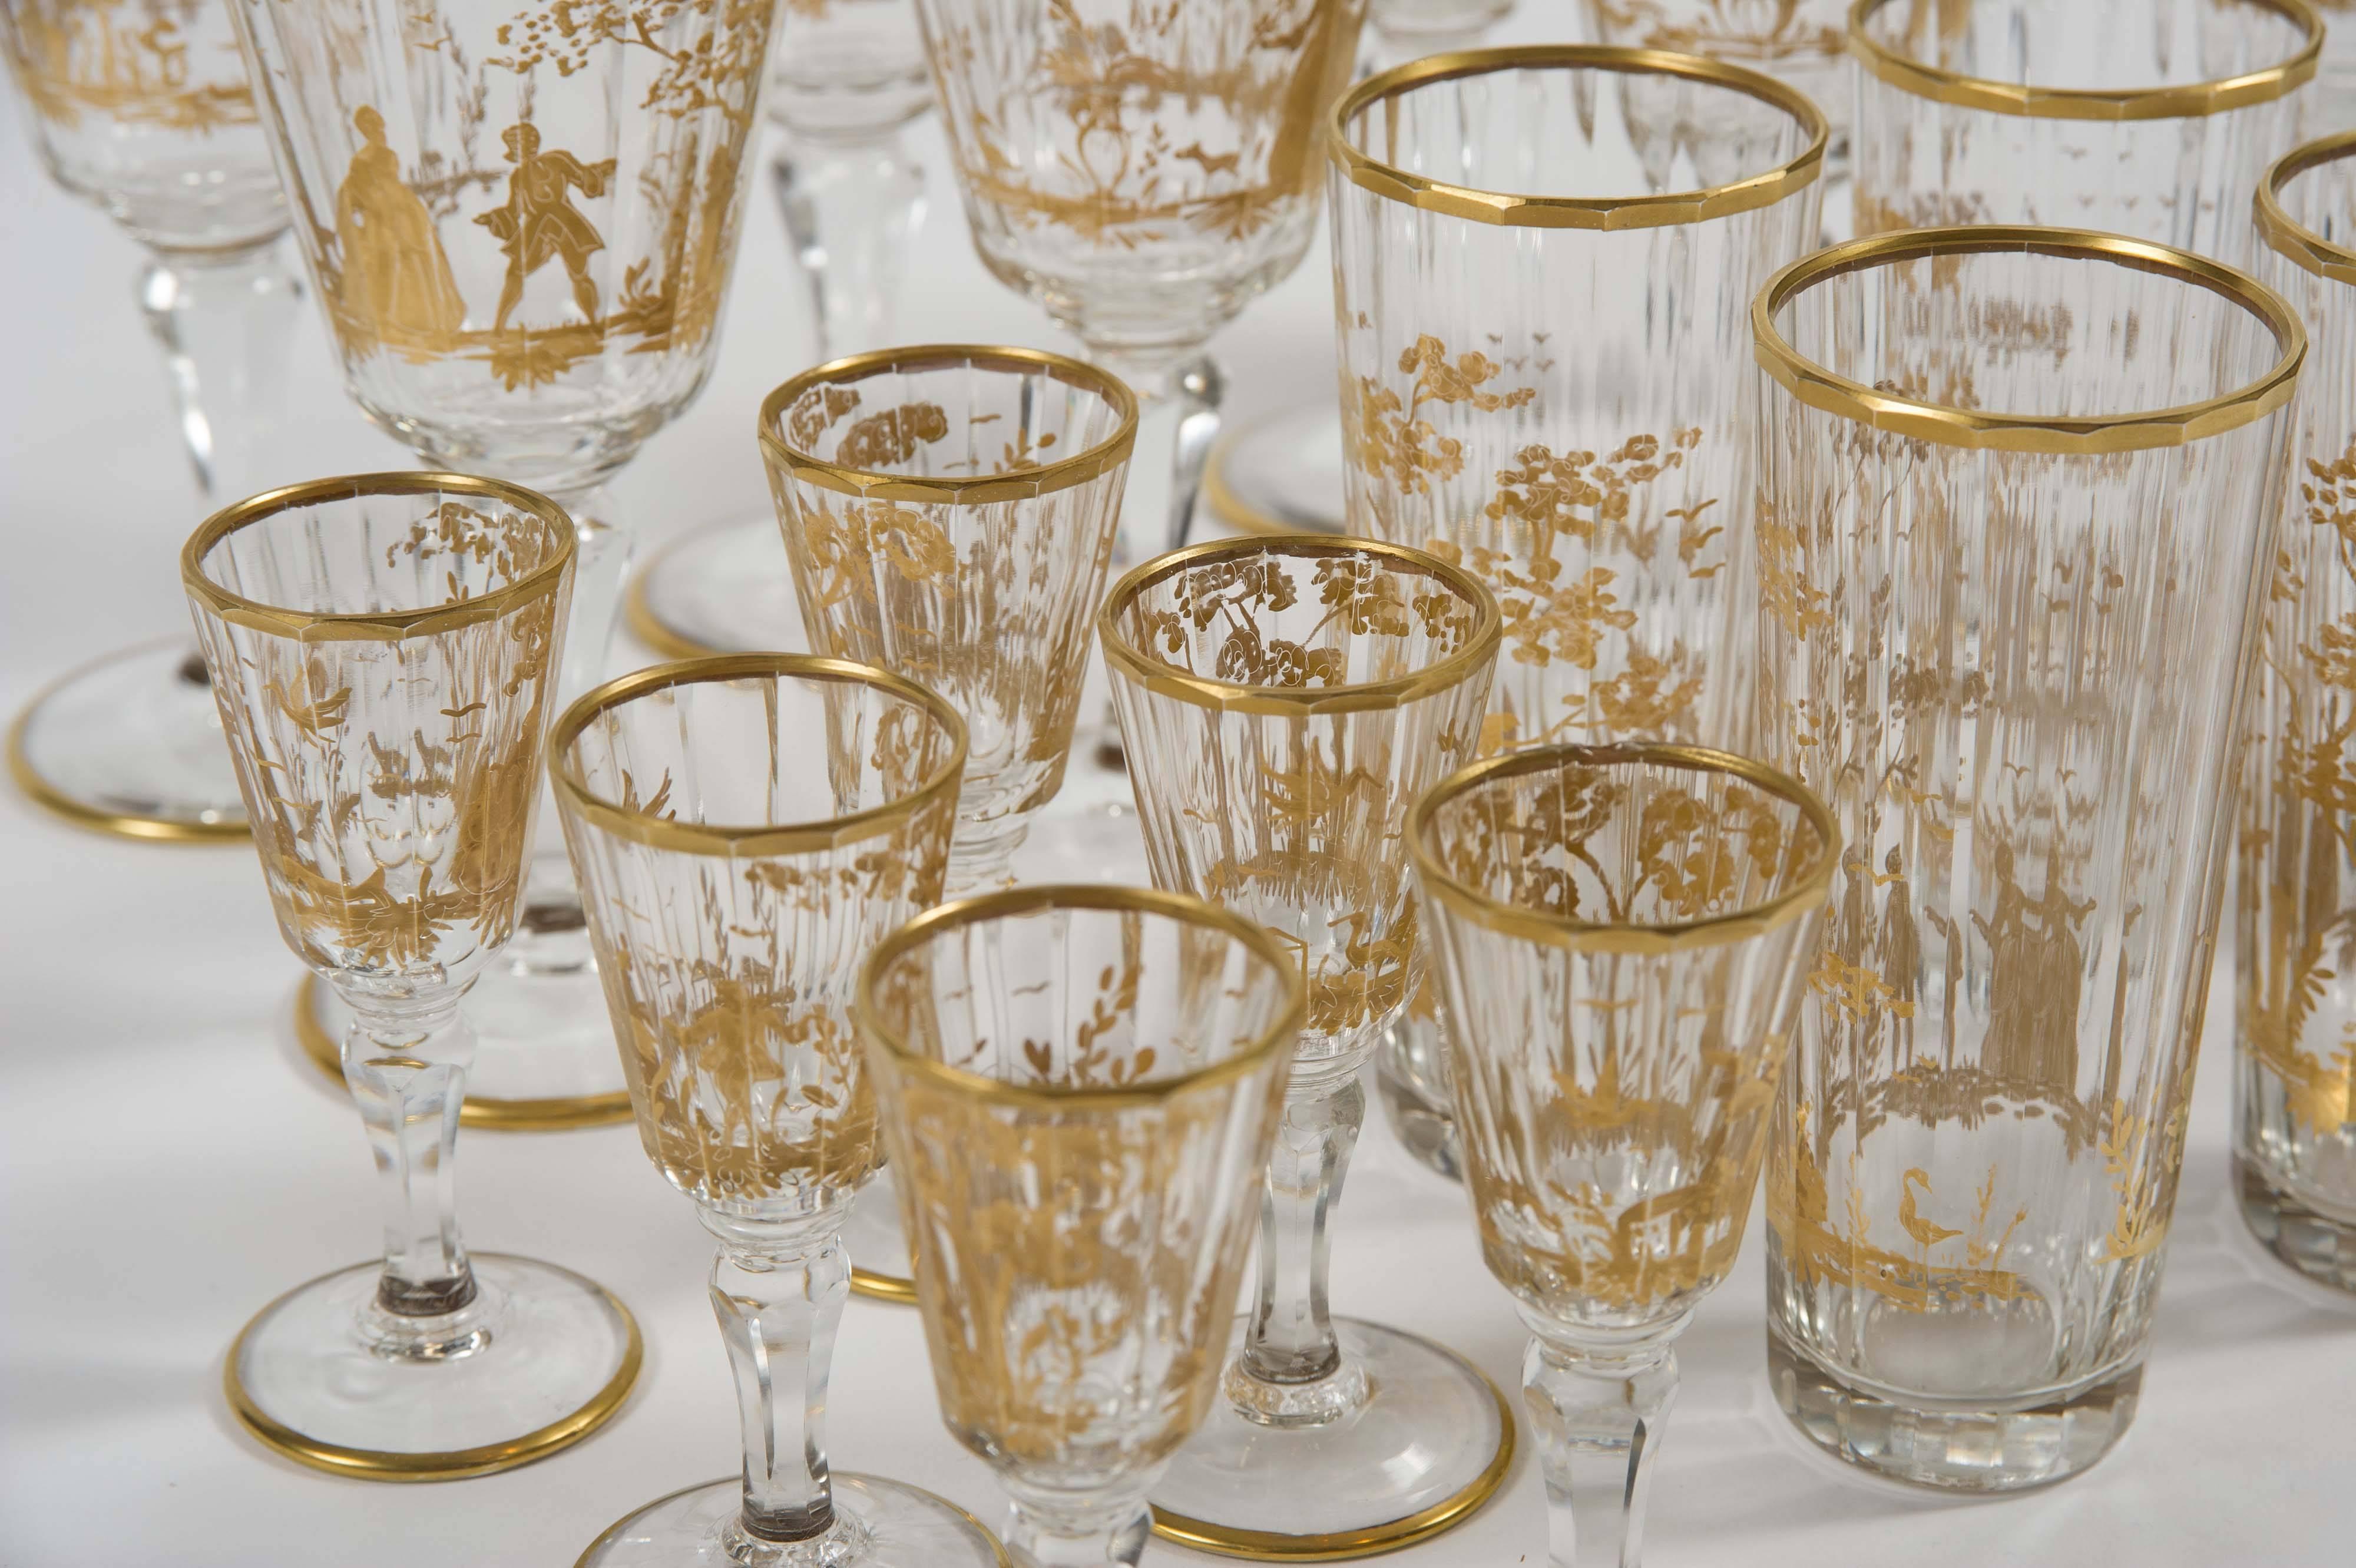 The set comprising eight wine glasses, eight water glasses and six liquor glasses.
All with extremely fine hand-painted gilt decoration. Each glass with a unique scene depicting a lady and gentleman in 18th century dress in a woodland.
Wine